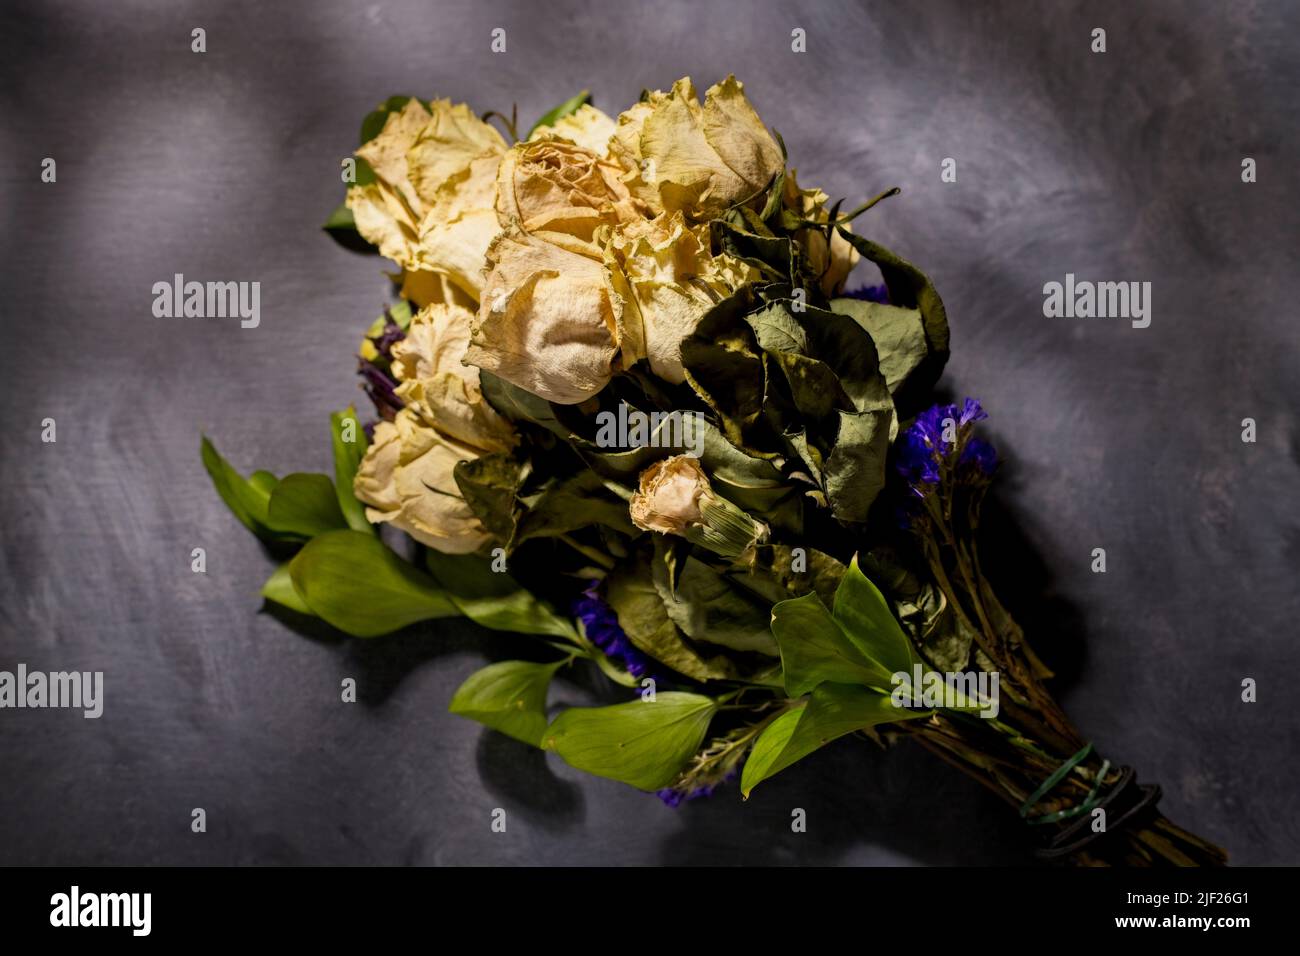 A dappled light studio photo of a bouquet of dried yellow roses on a table. Stock Photo